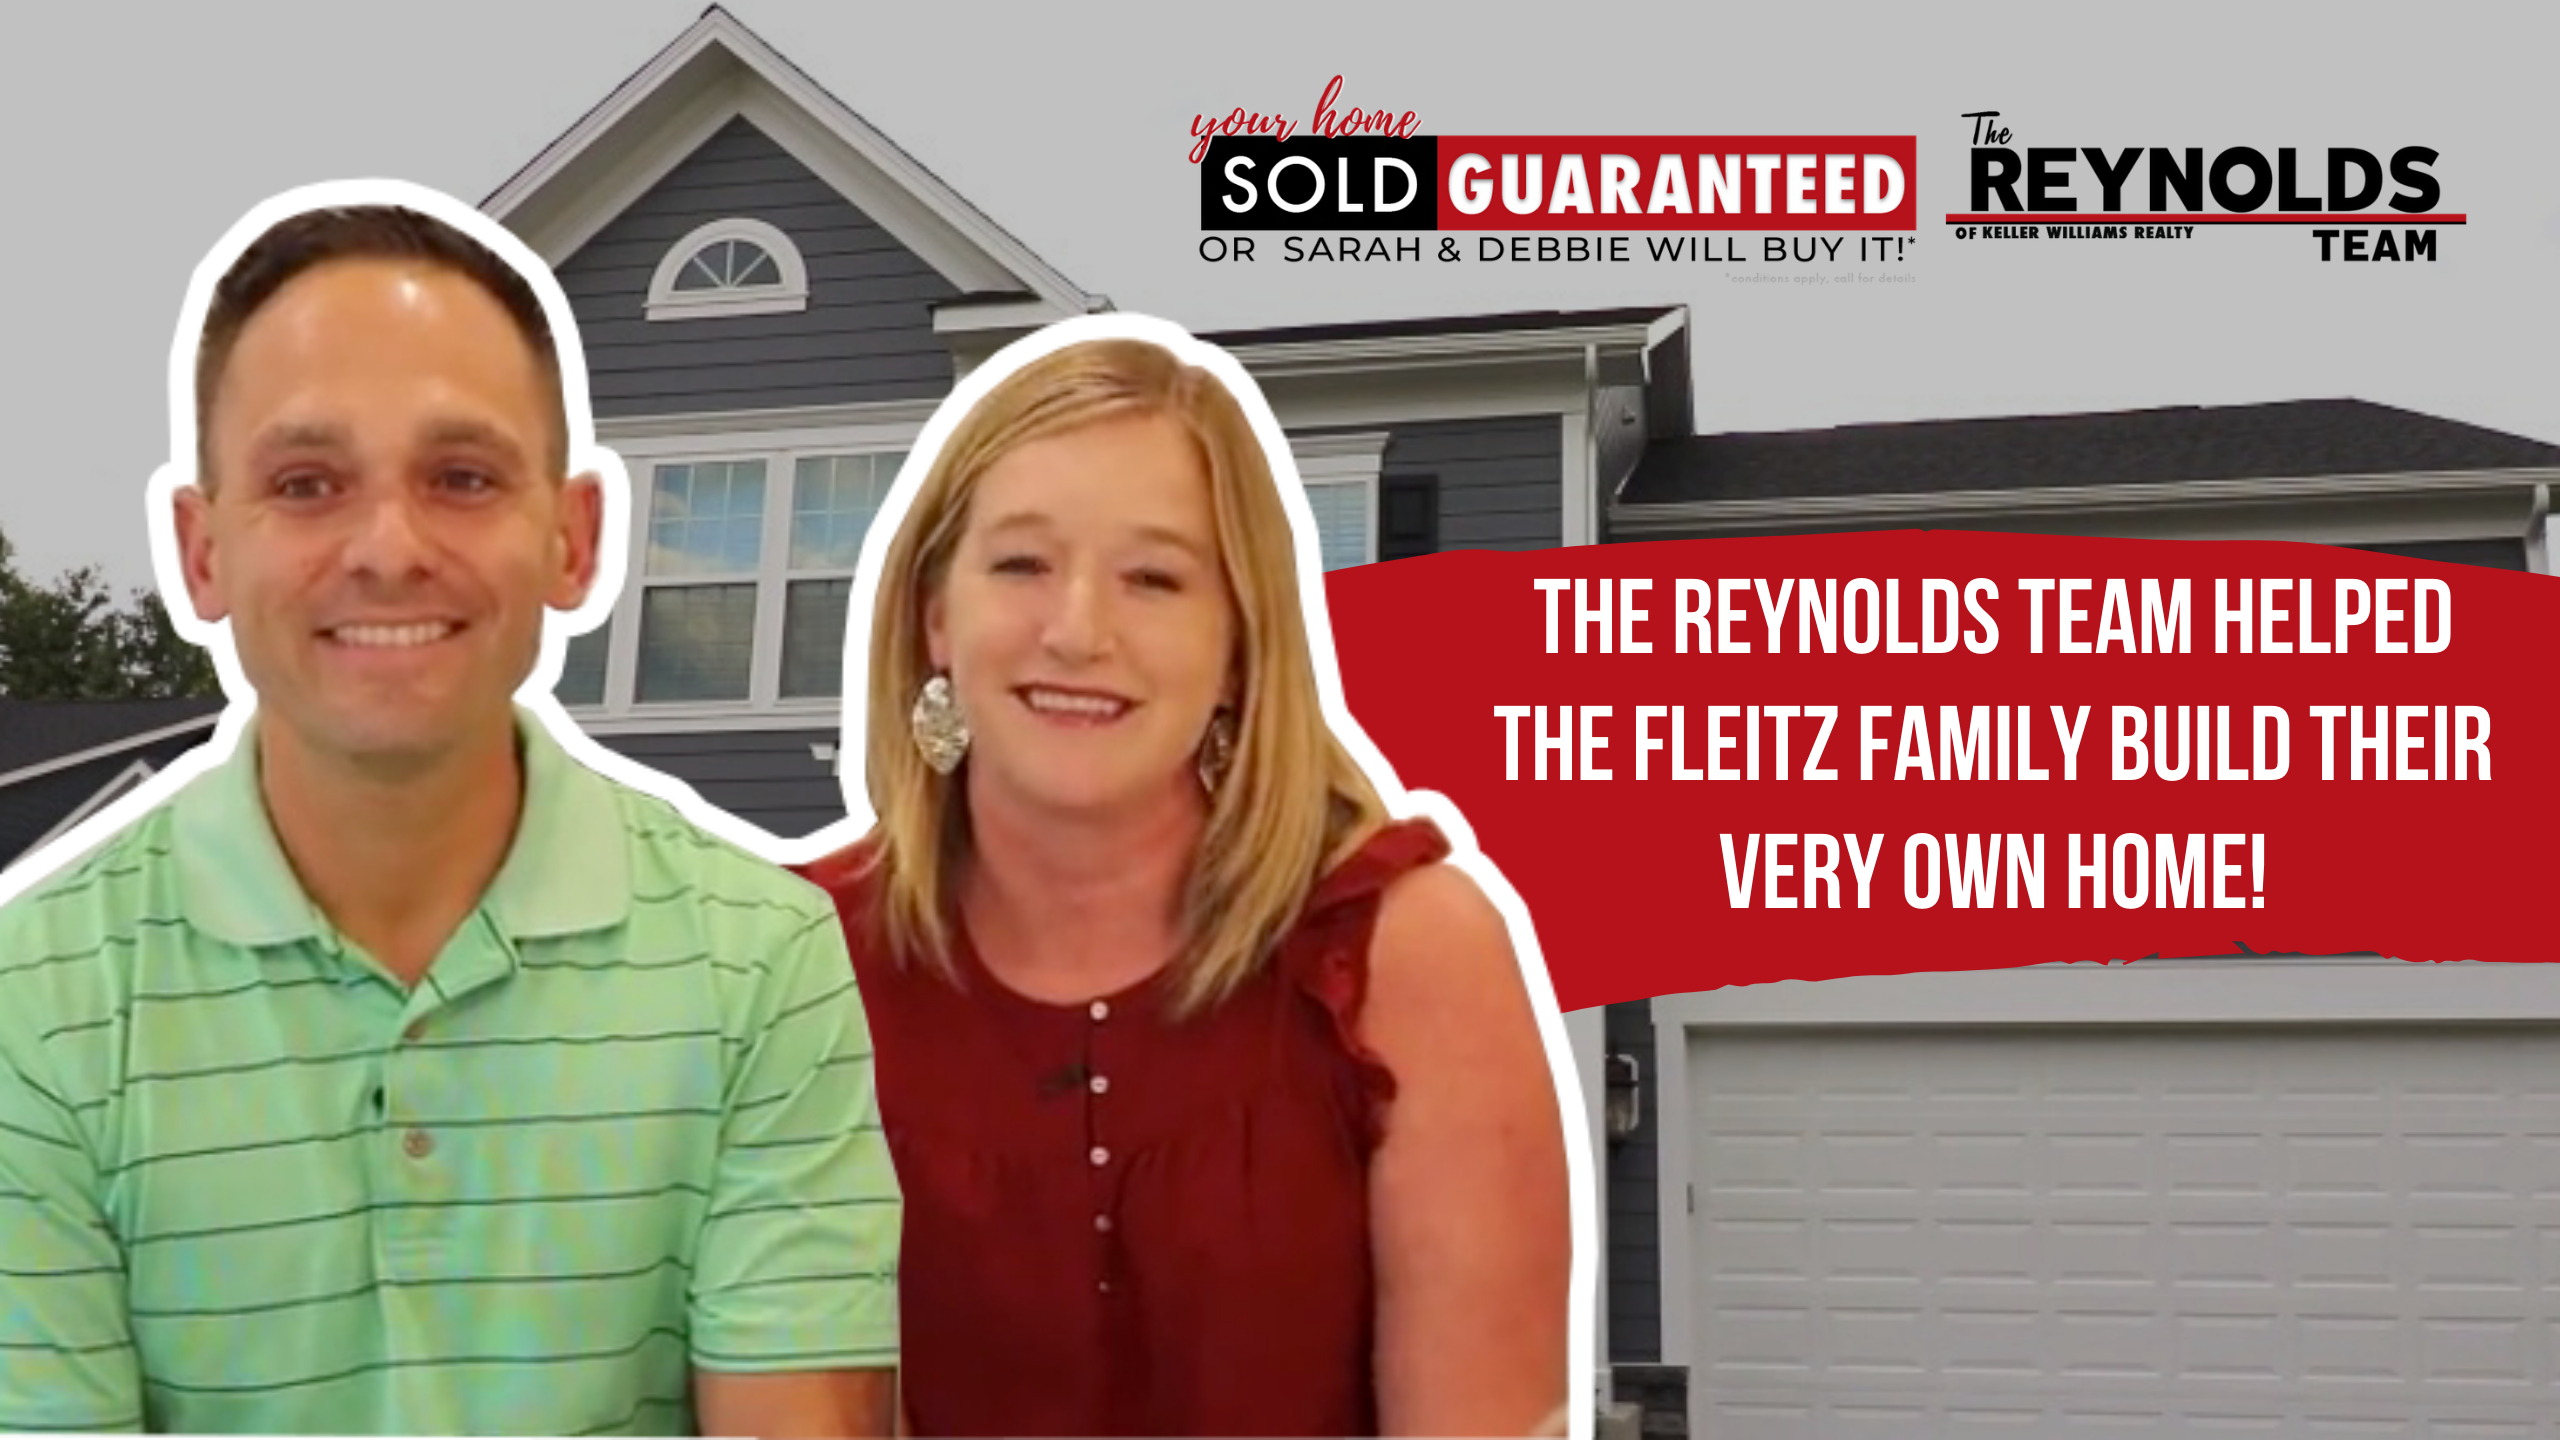 The Reynolds Team Helped the Fleitz Family Build Their Very Own Home!